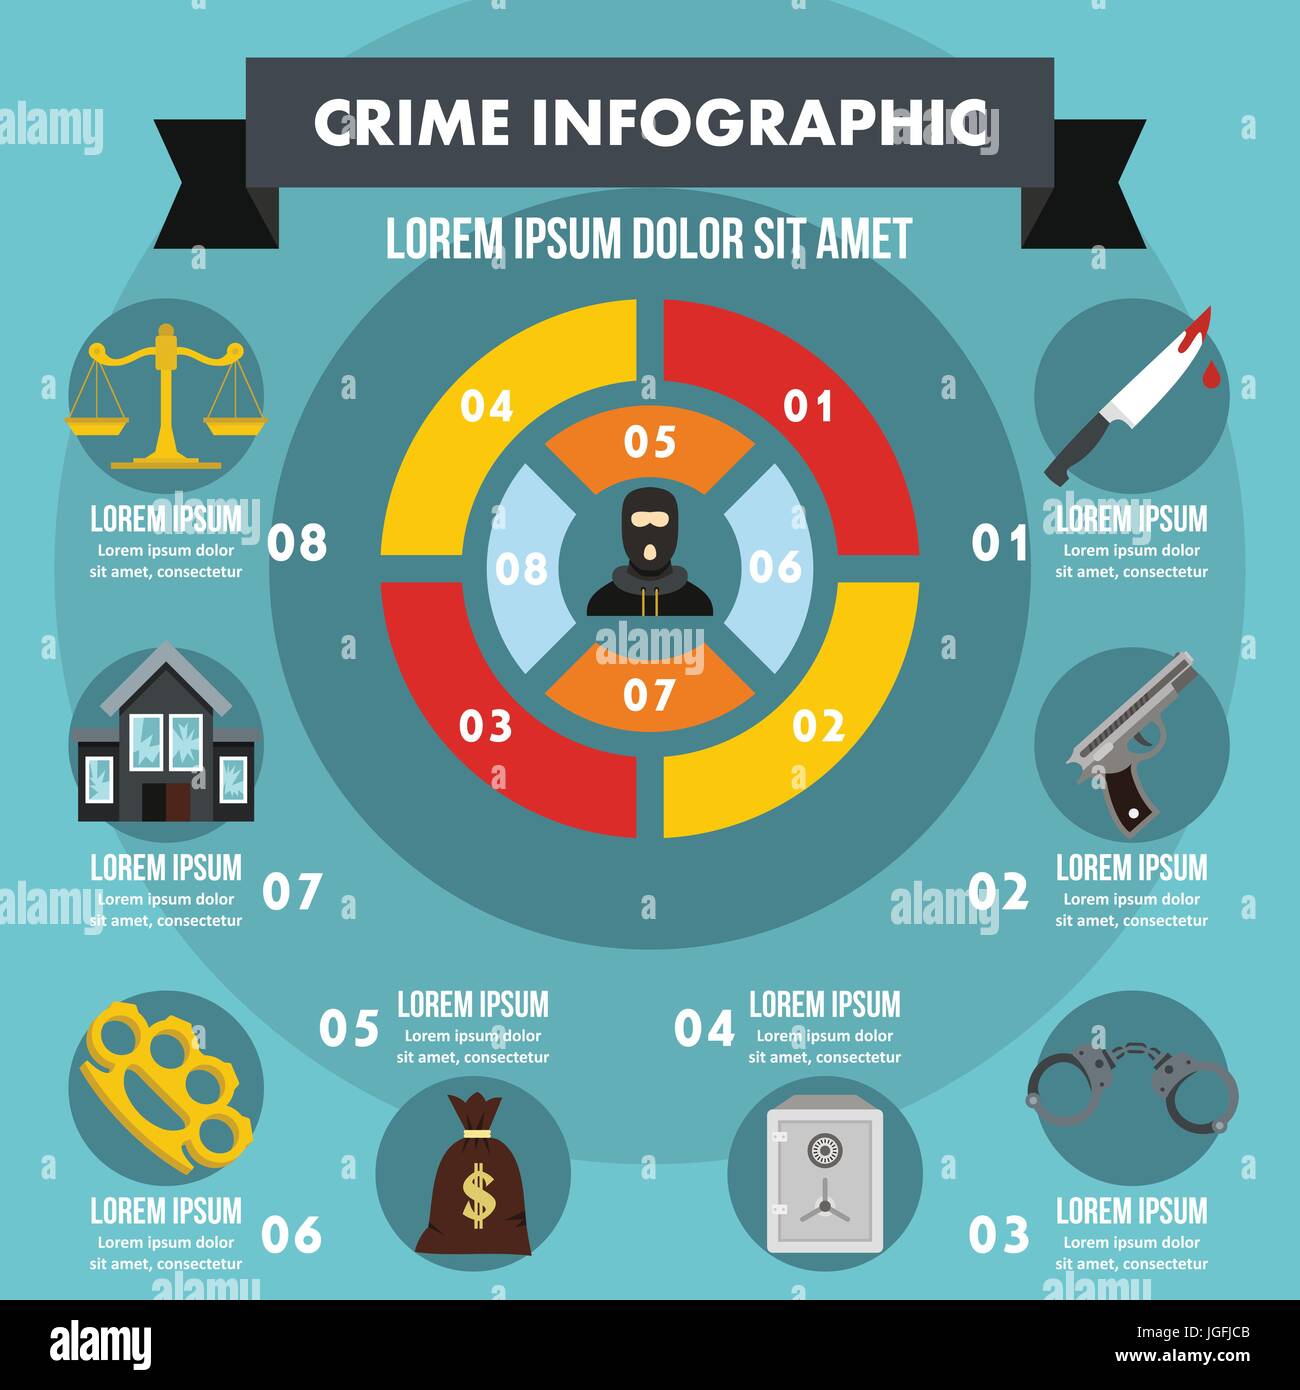 Crime infographic concept, flat style Stock Vector